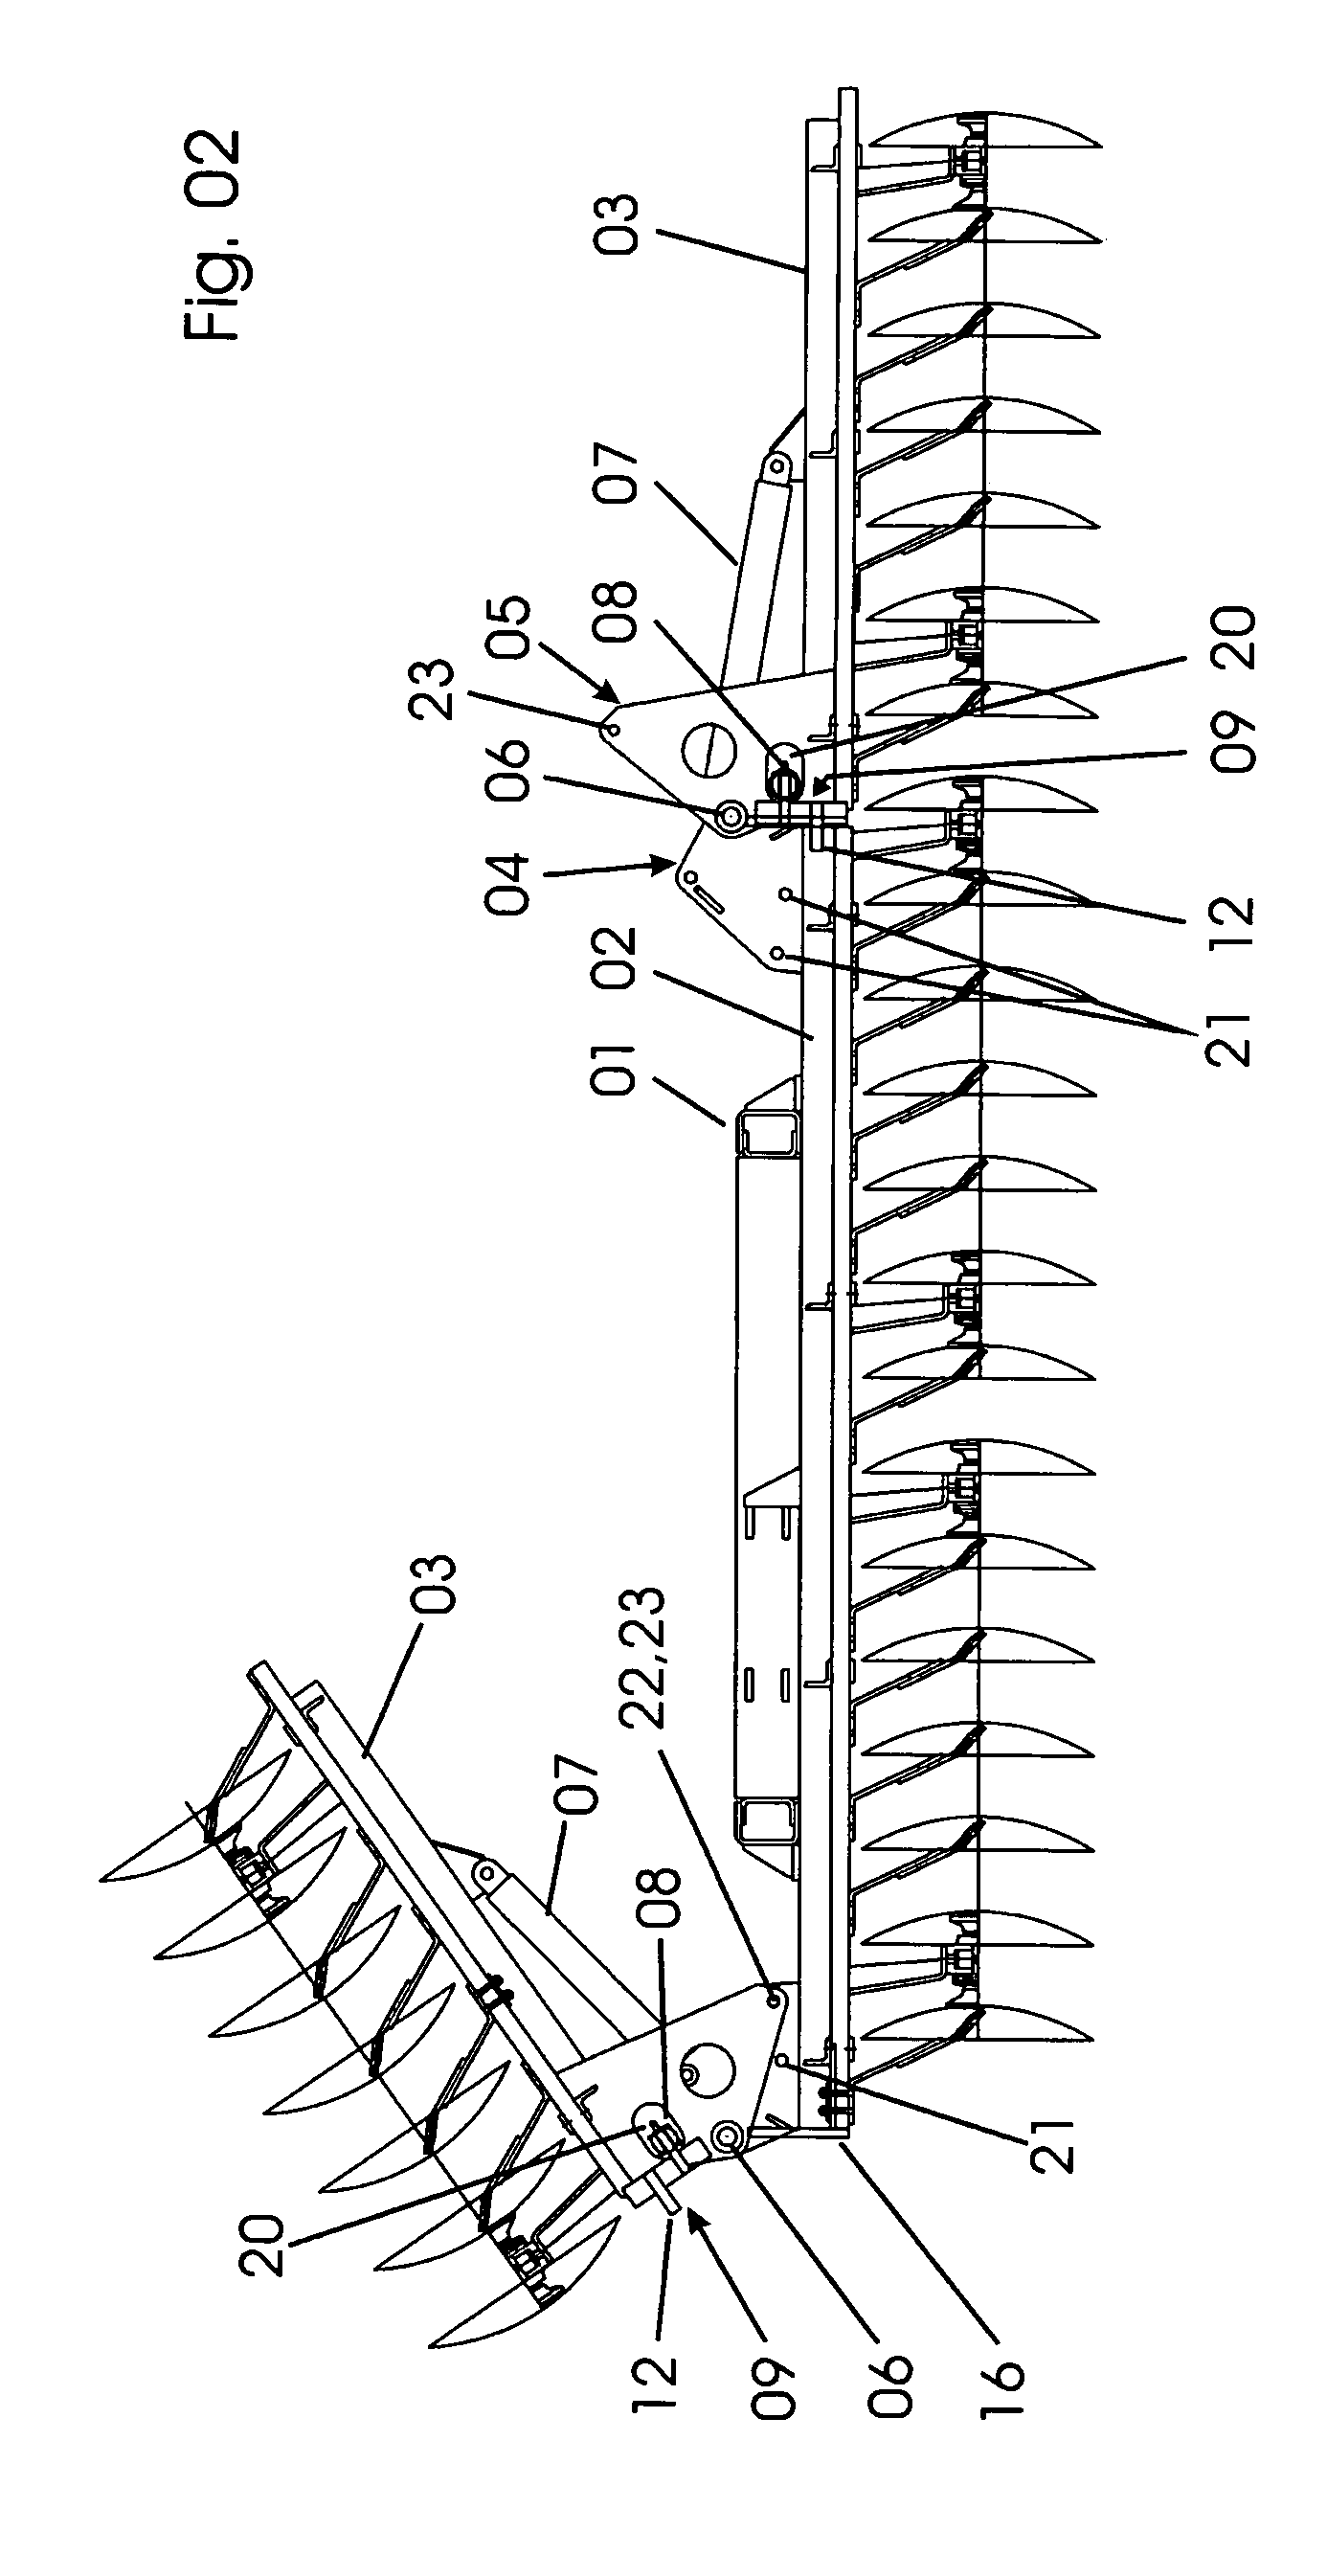 Articulating and locking mechanism for farm implement chassis